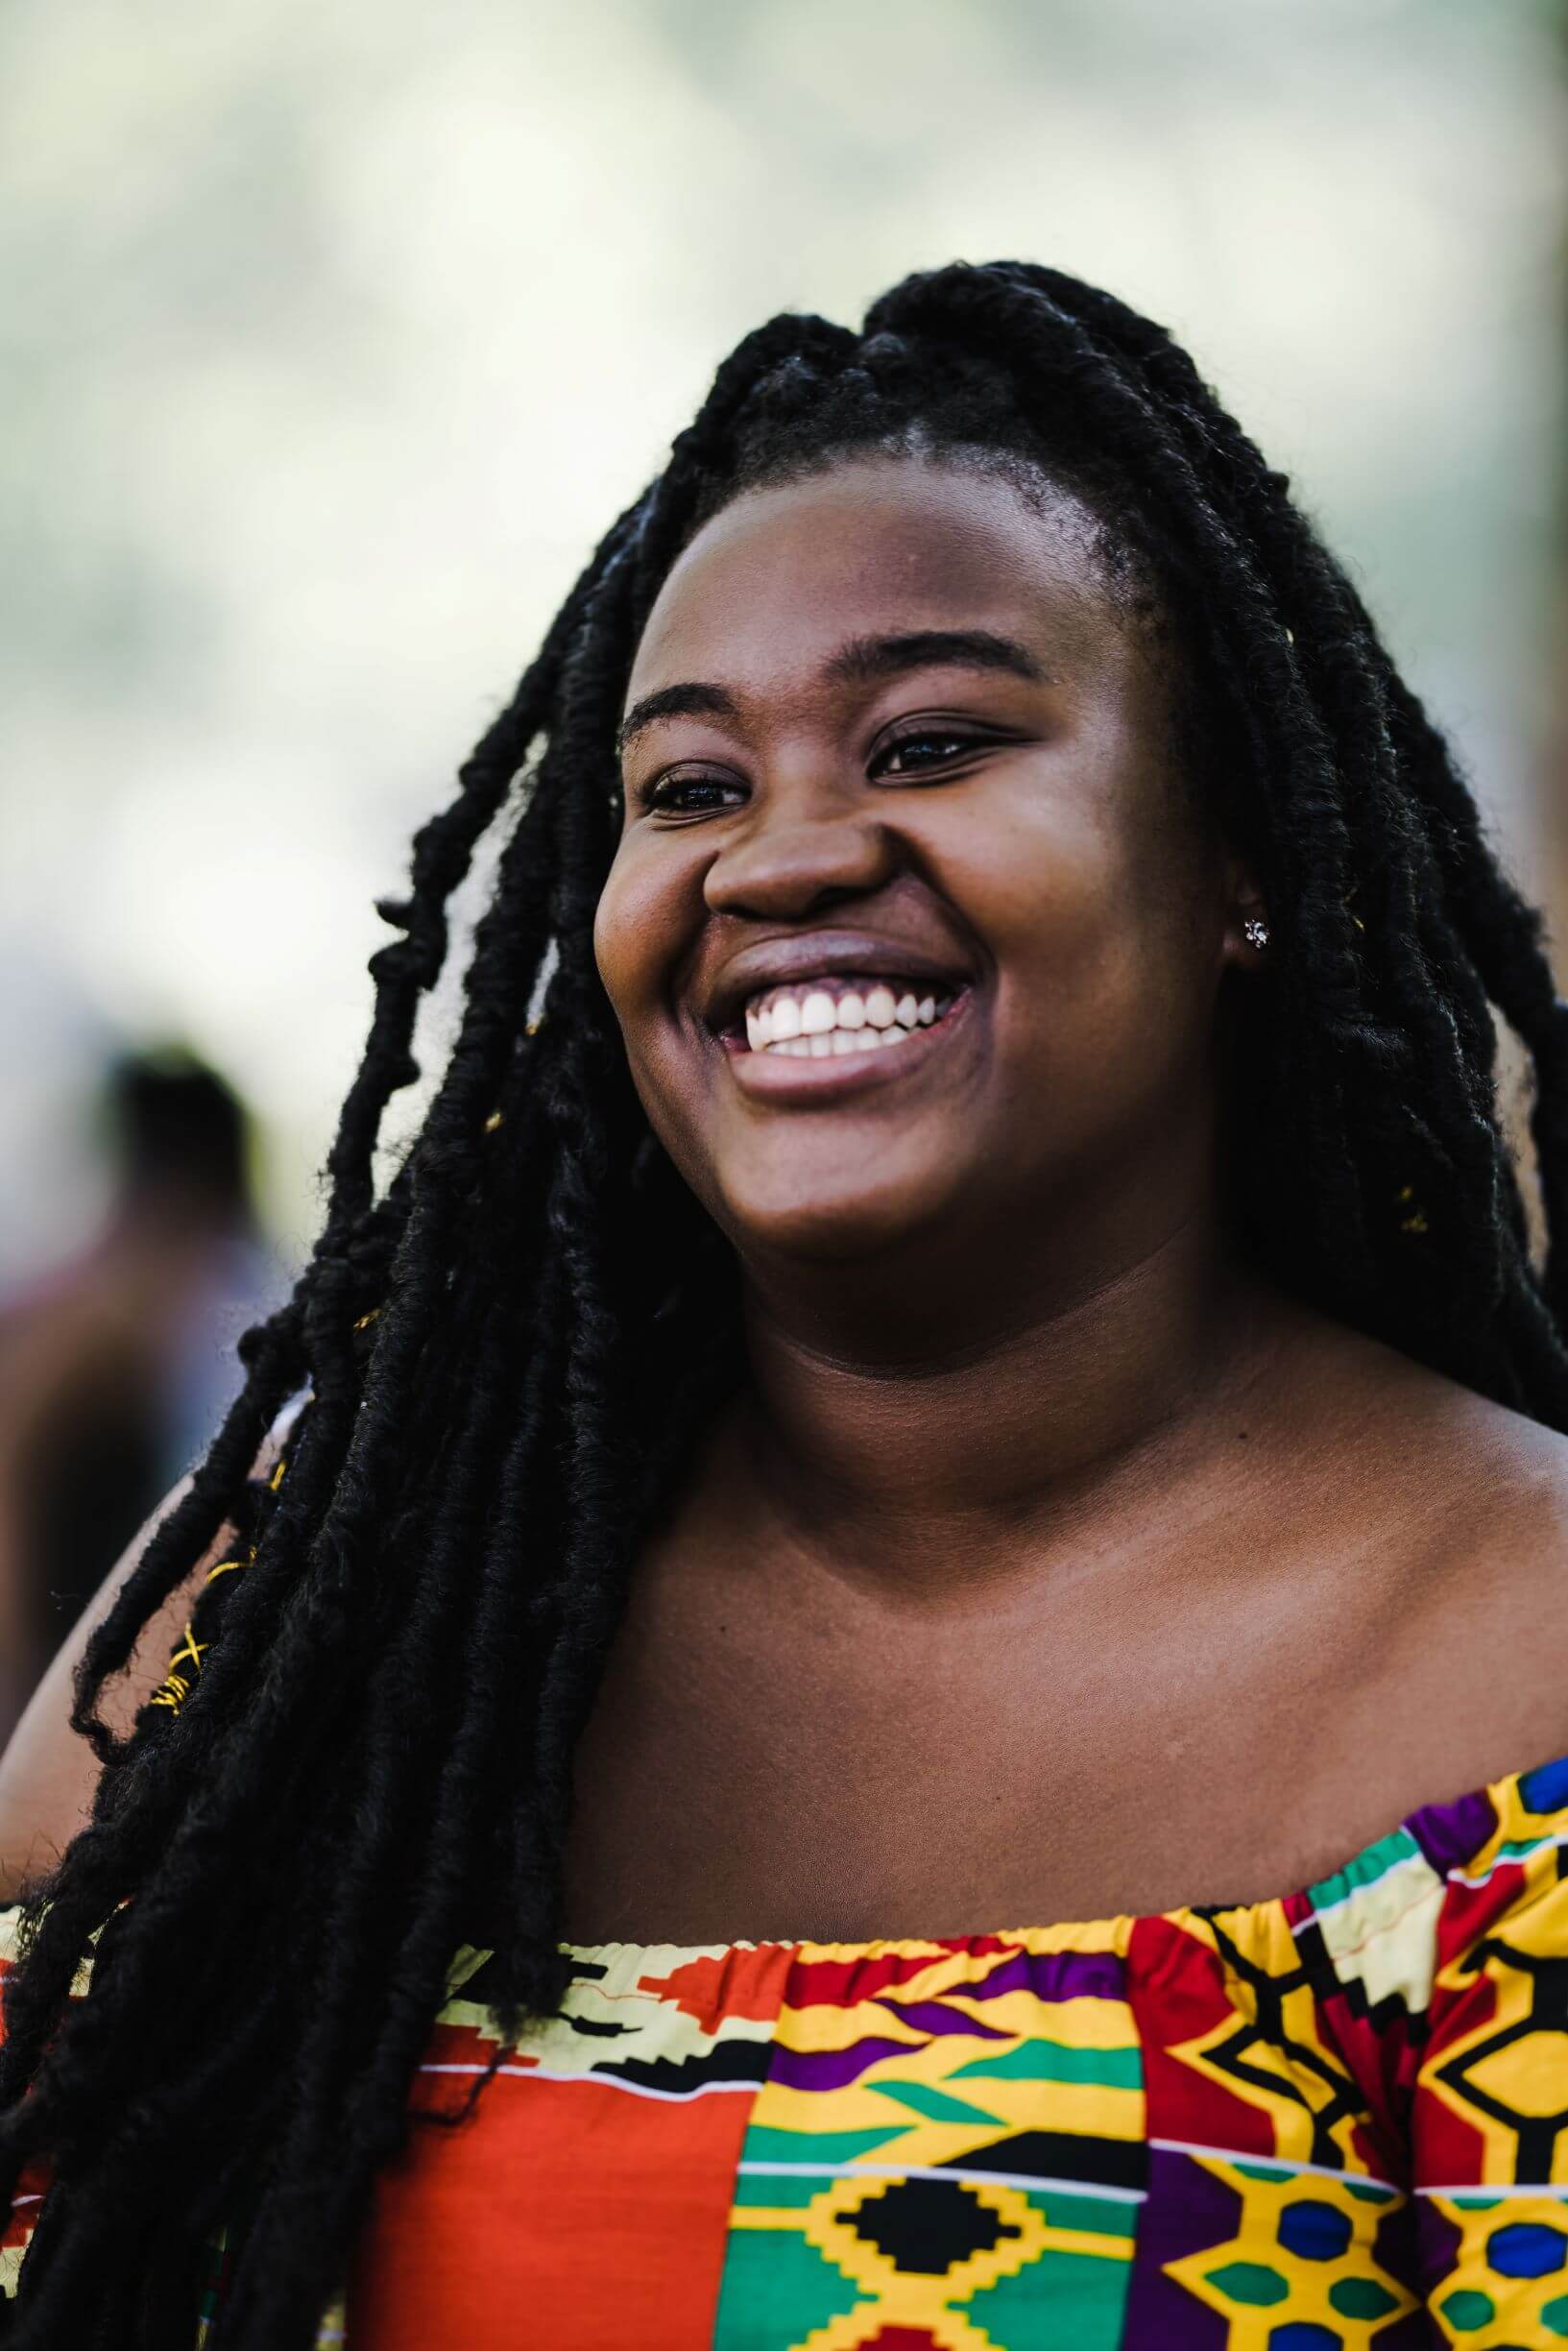 black woman with braids smiling